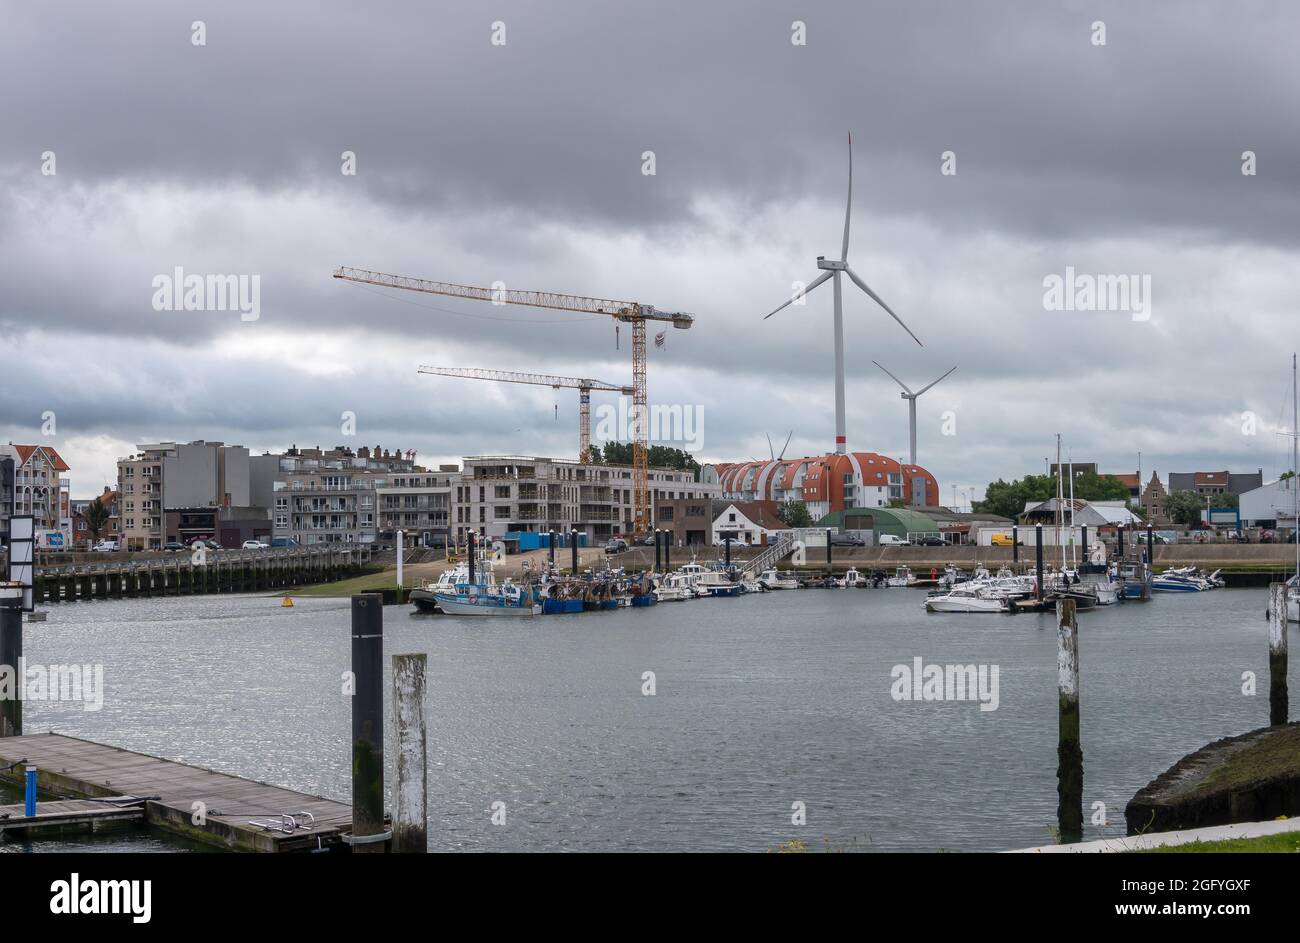 Zeebrugge Port, Belgium - August 6, 2021: Werfkaai section of yacht harbor with tall windmills and construction cranes in back under heavy rainy cloud Stock Photo